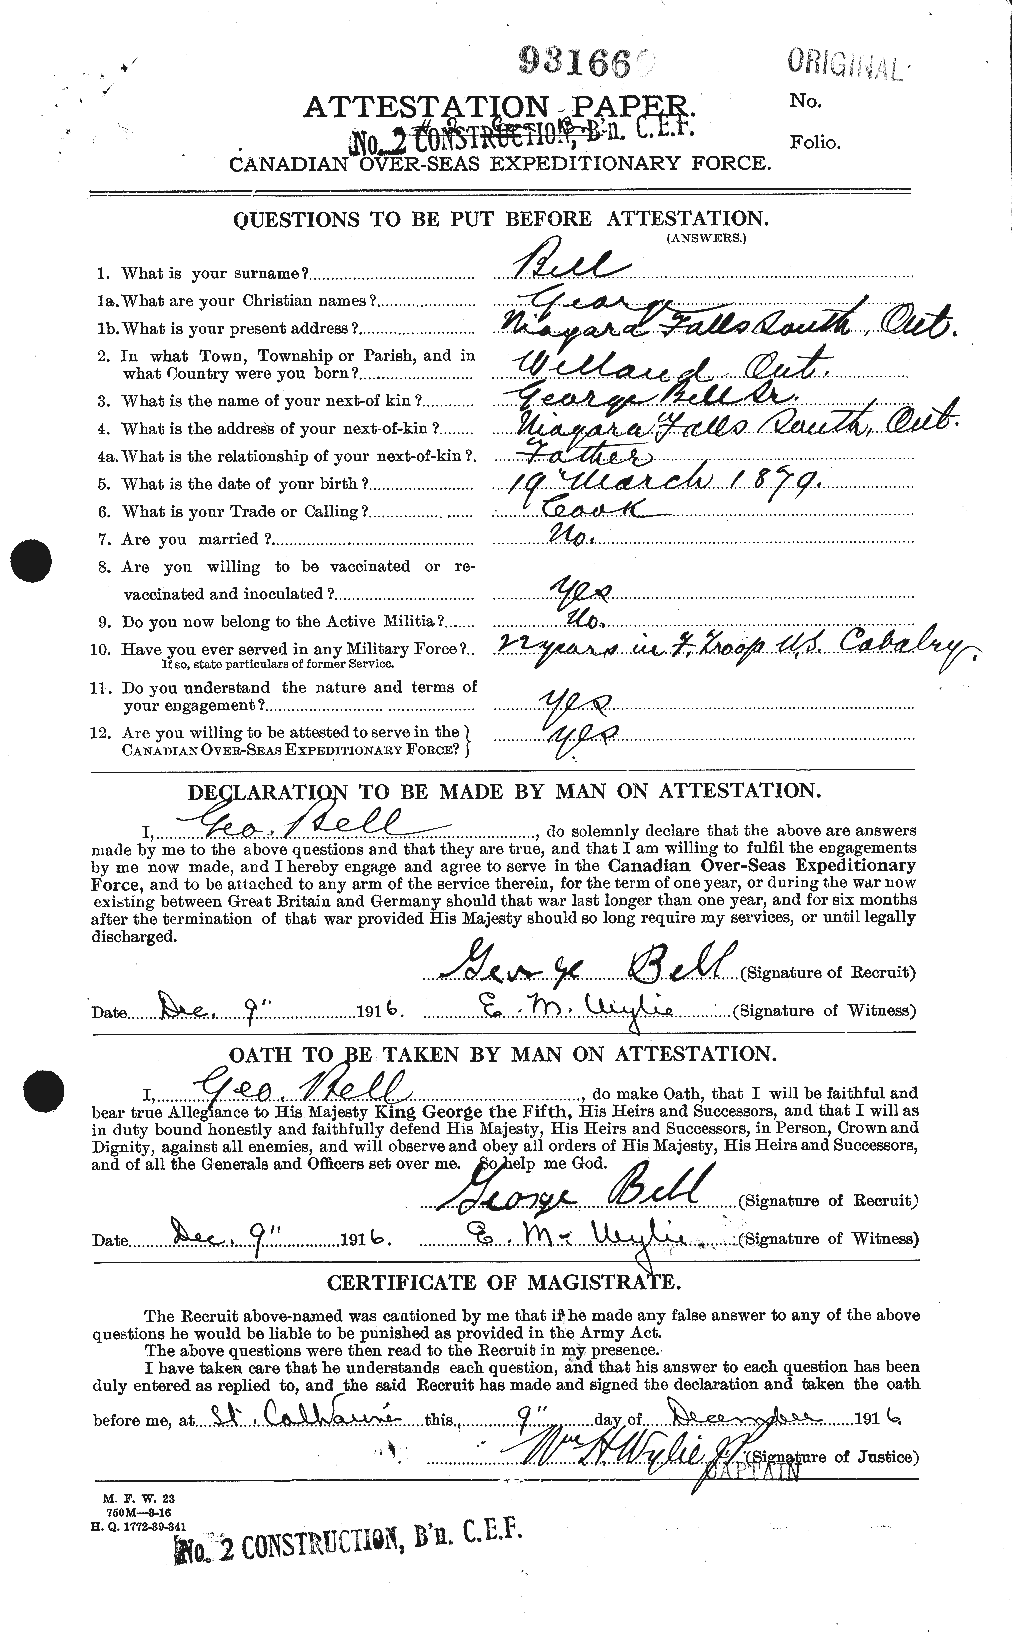 Personnel Records of the First World War - CEF 234148a